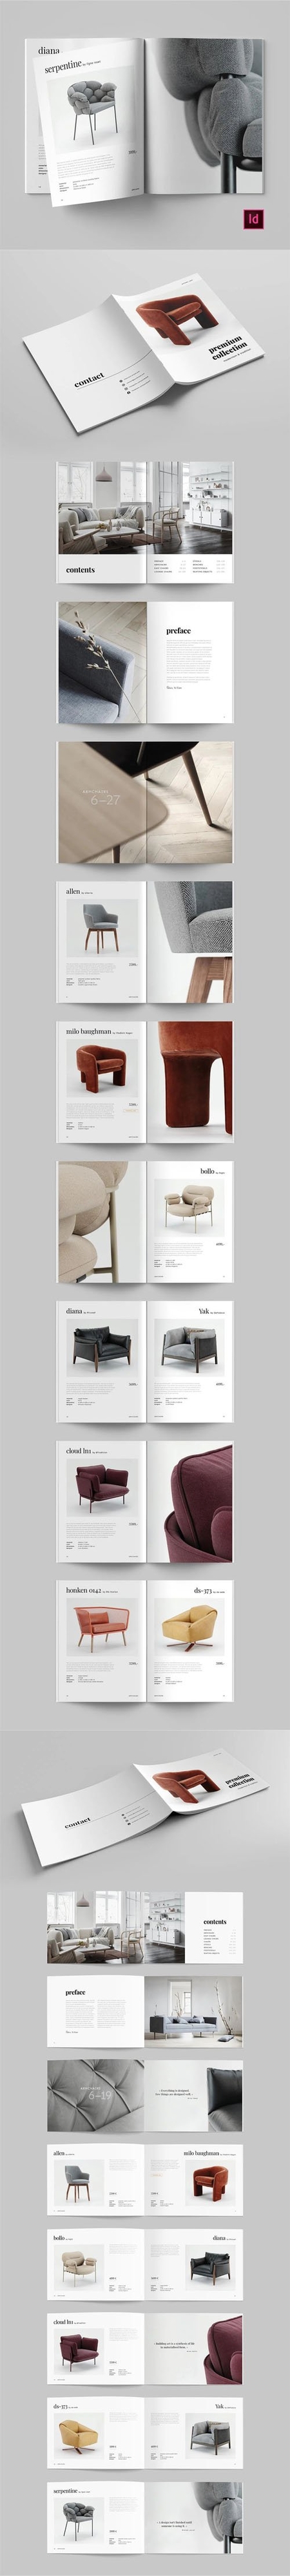 Product Brochure Indesign INDD Template